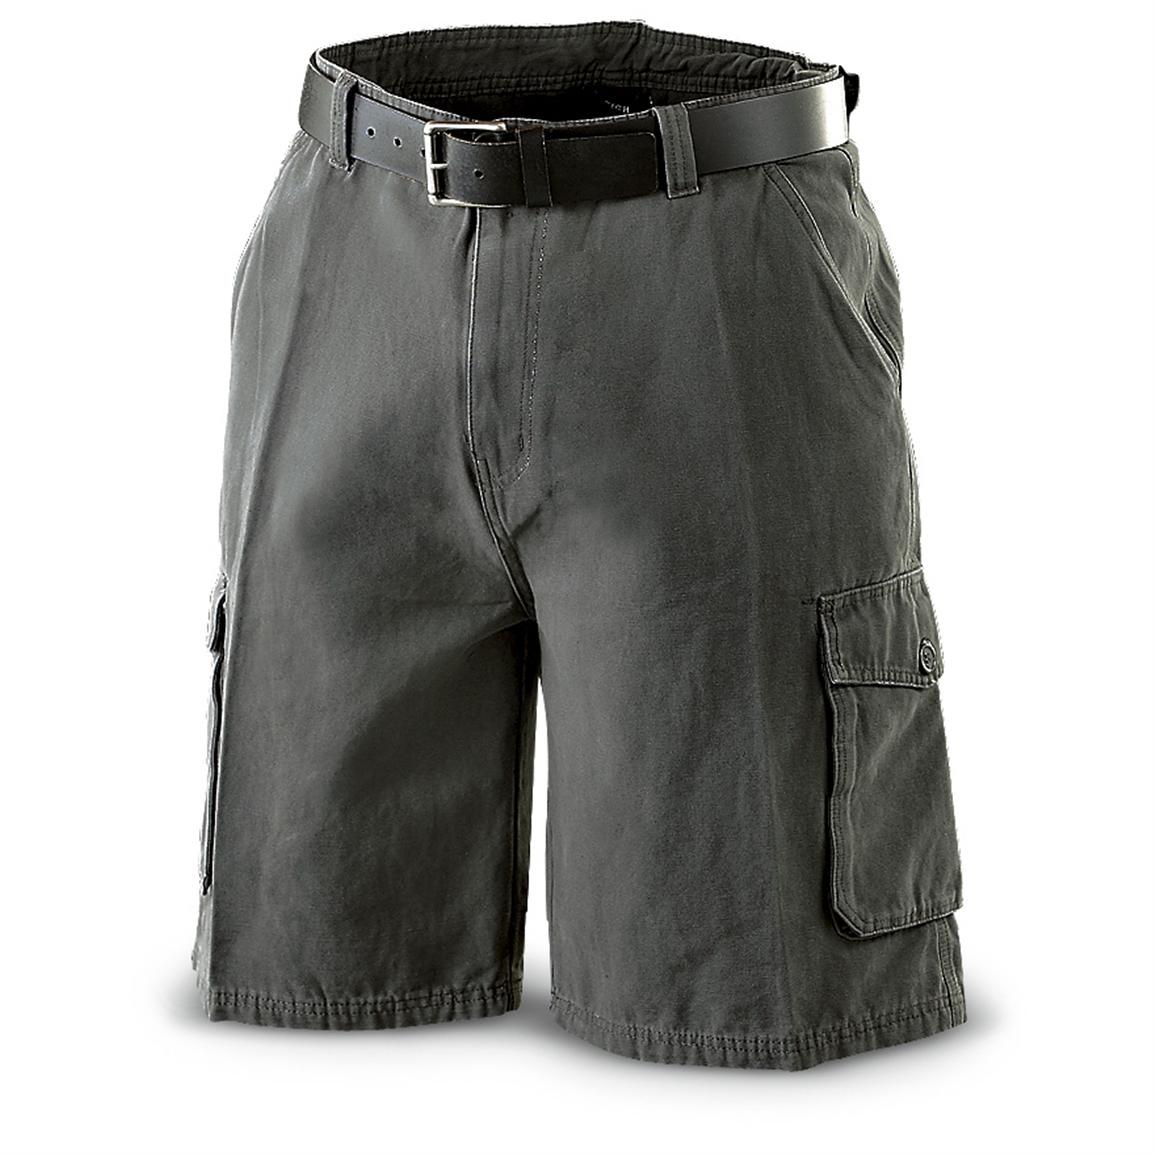 I5® Canvas Cargo Shorts - 234954, Shorts at Sportsman's Guide